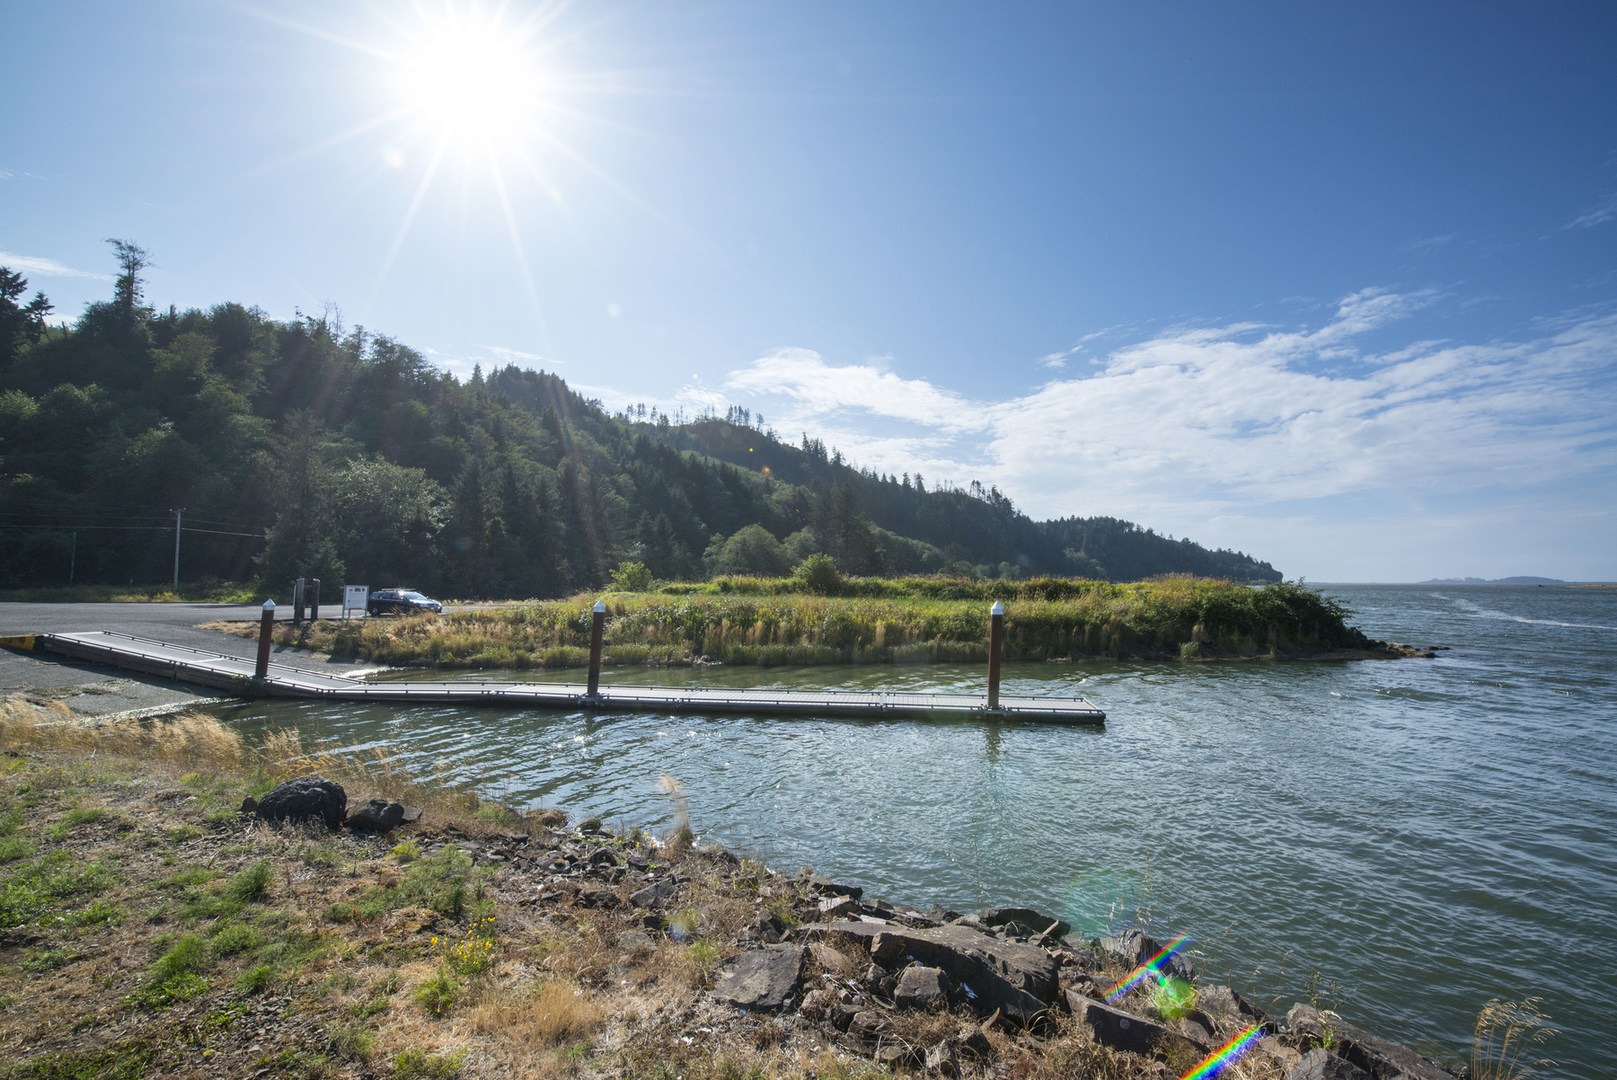 The Tillamook Bay Heritage Route Outdoor Project